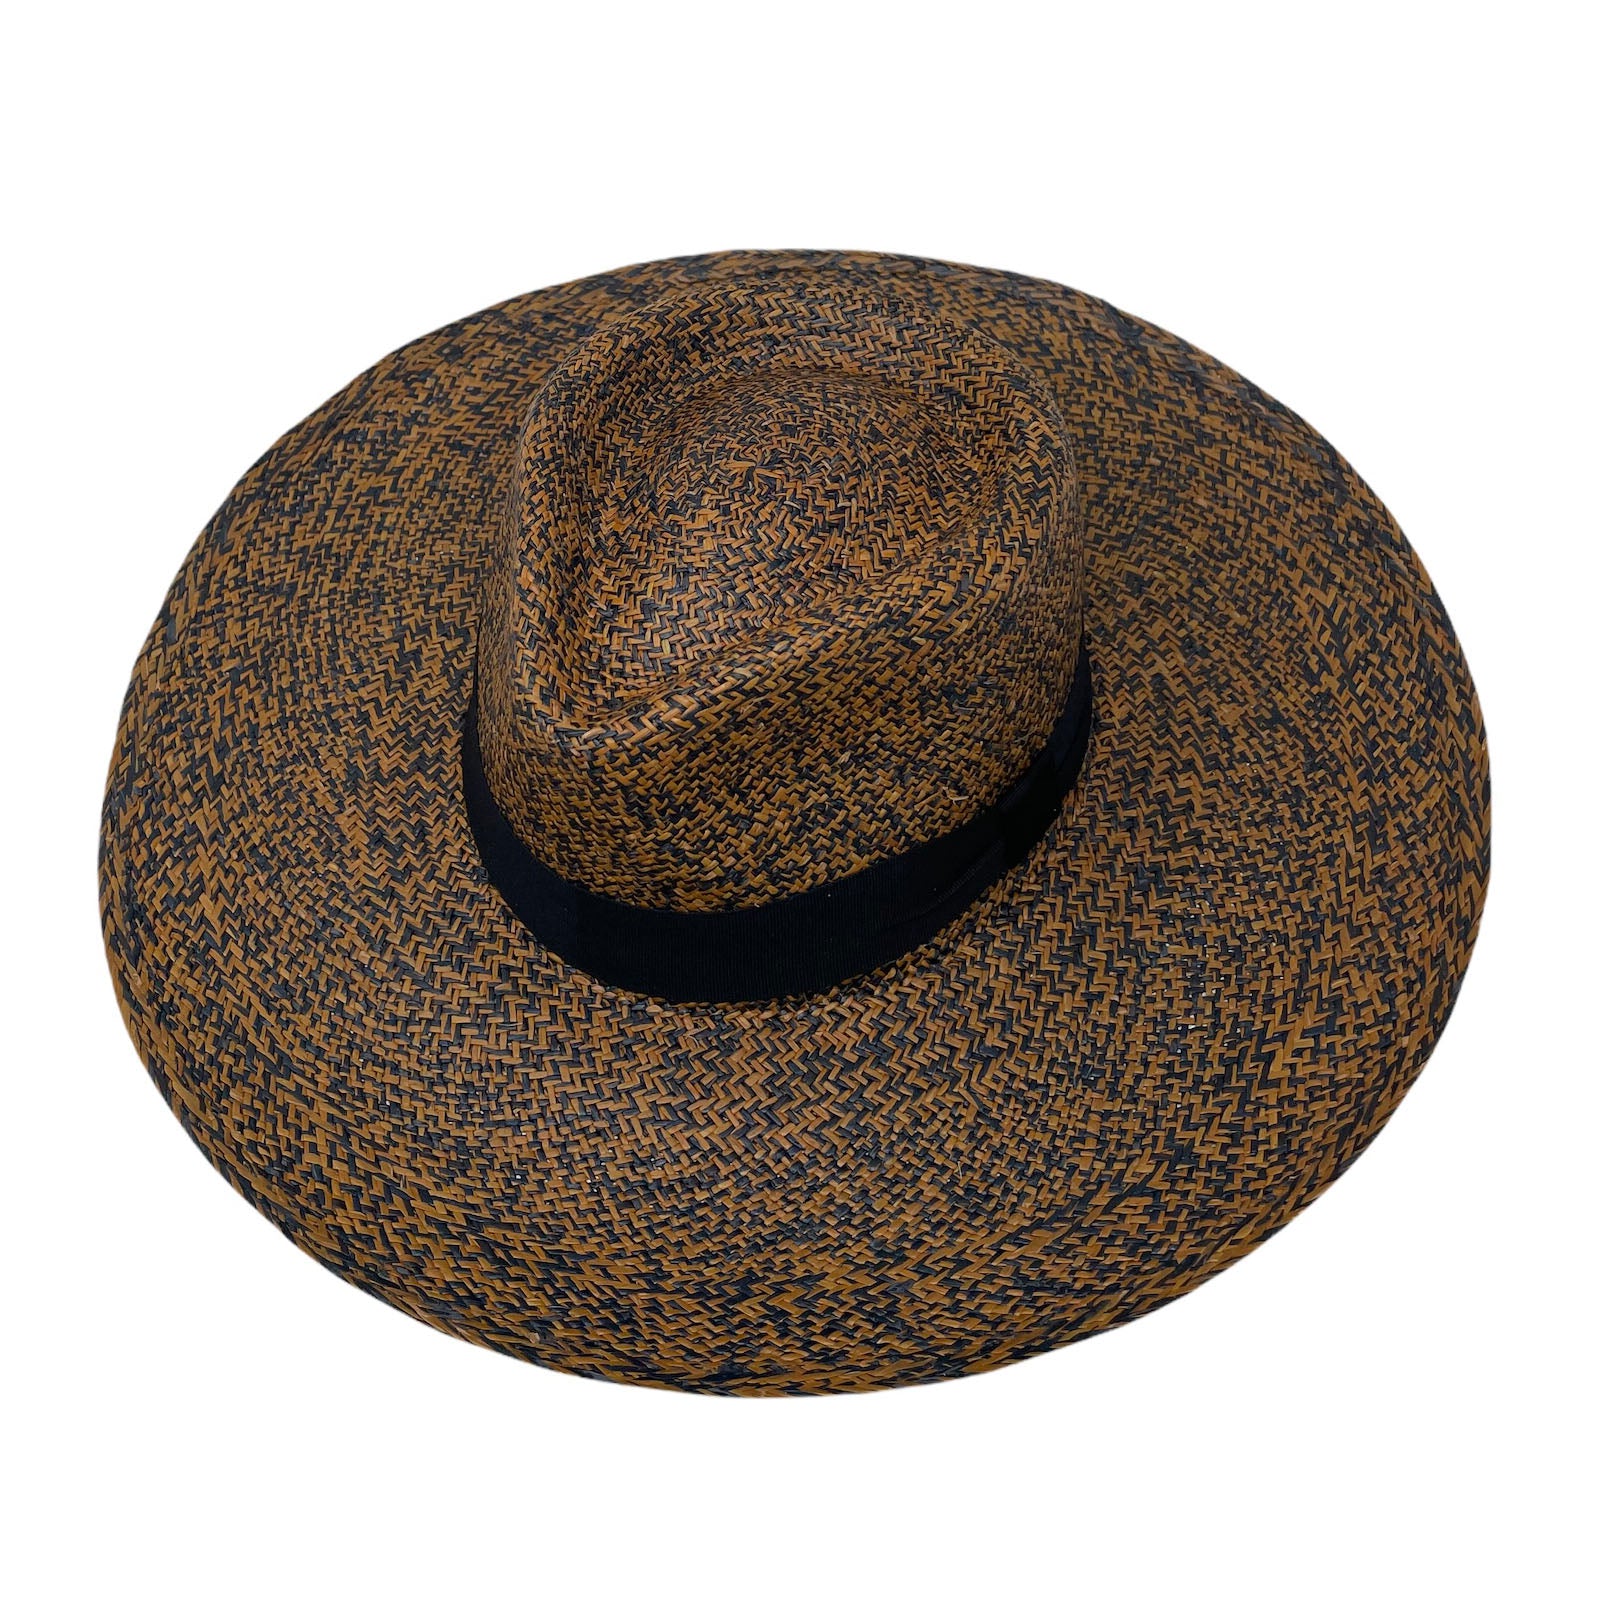 WOVEN STRAW HATS